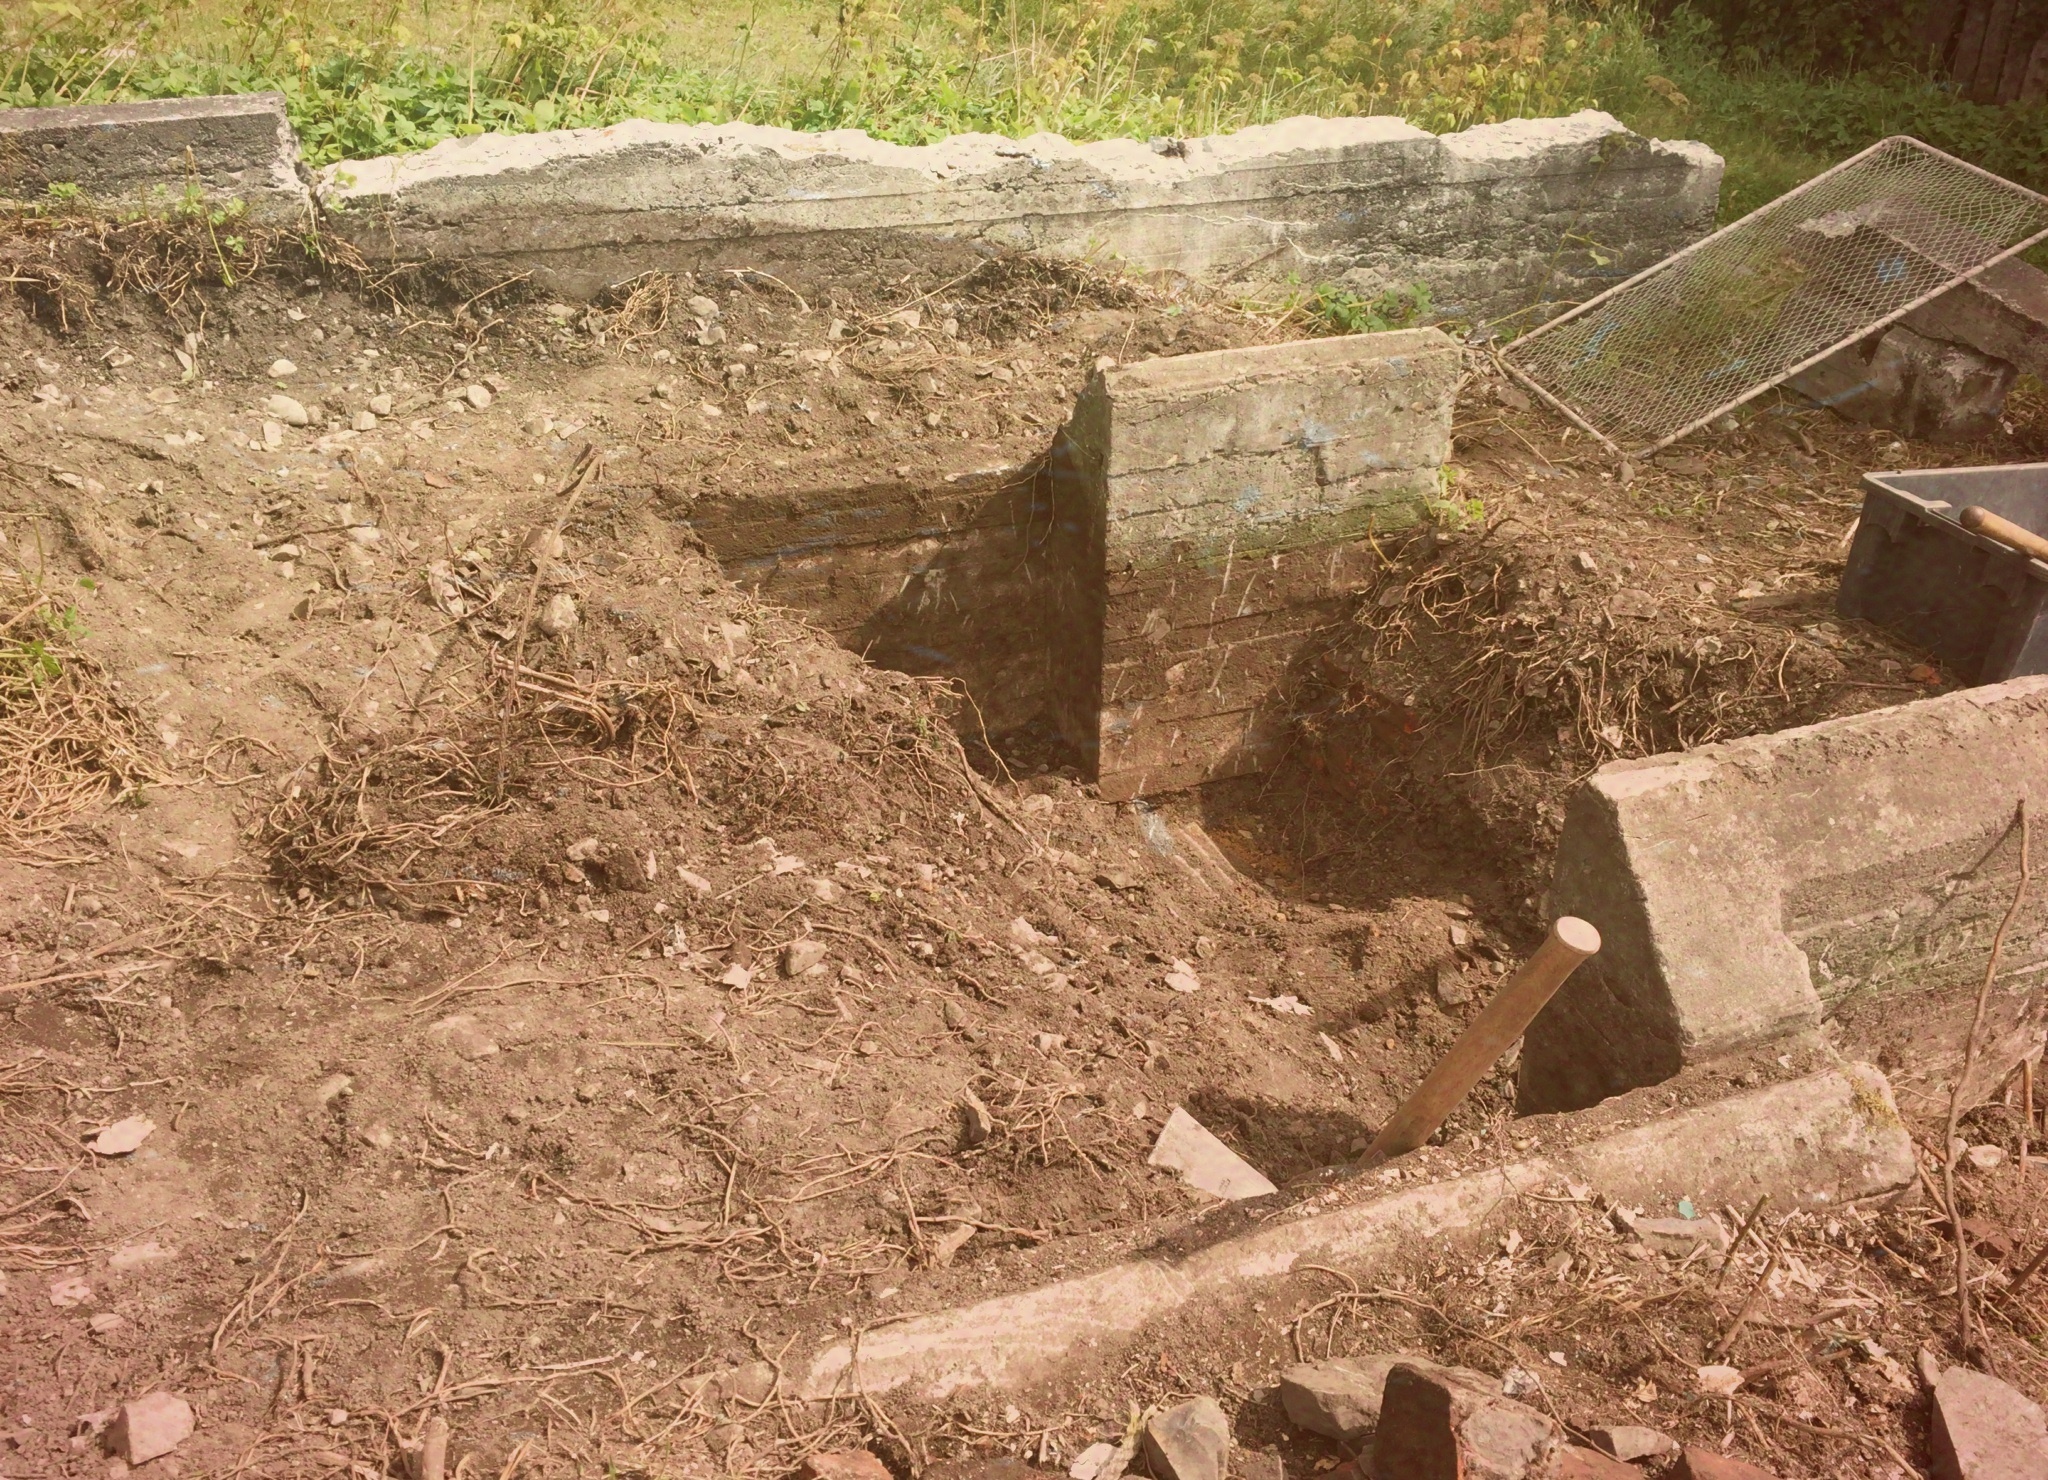 The Buried Root Cellar